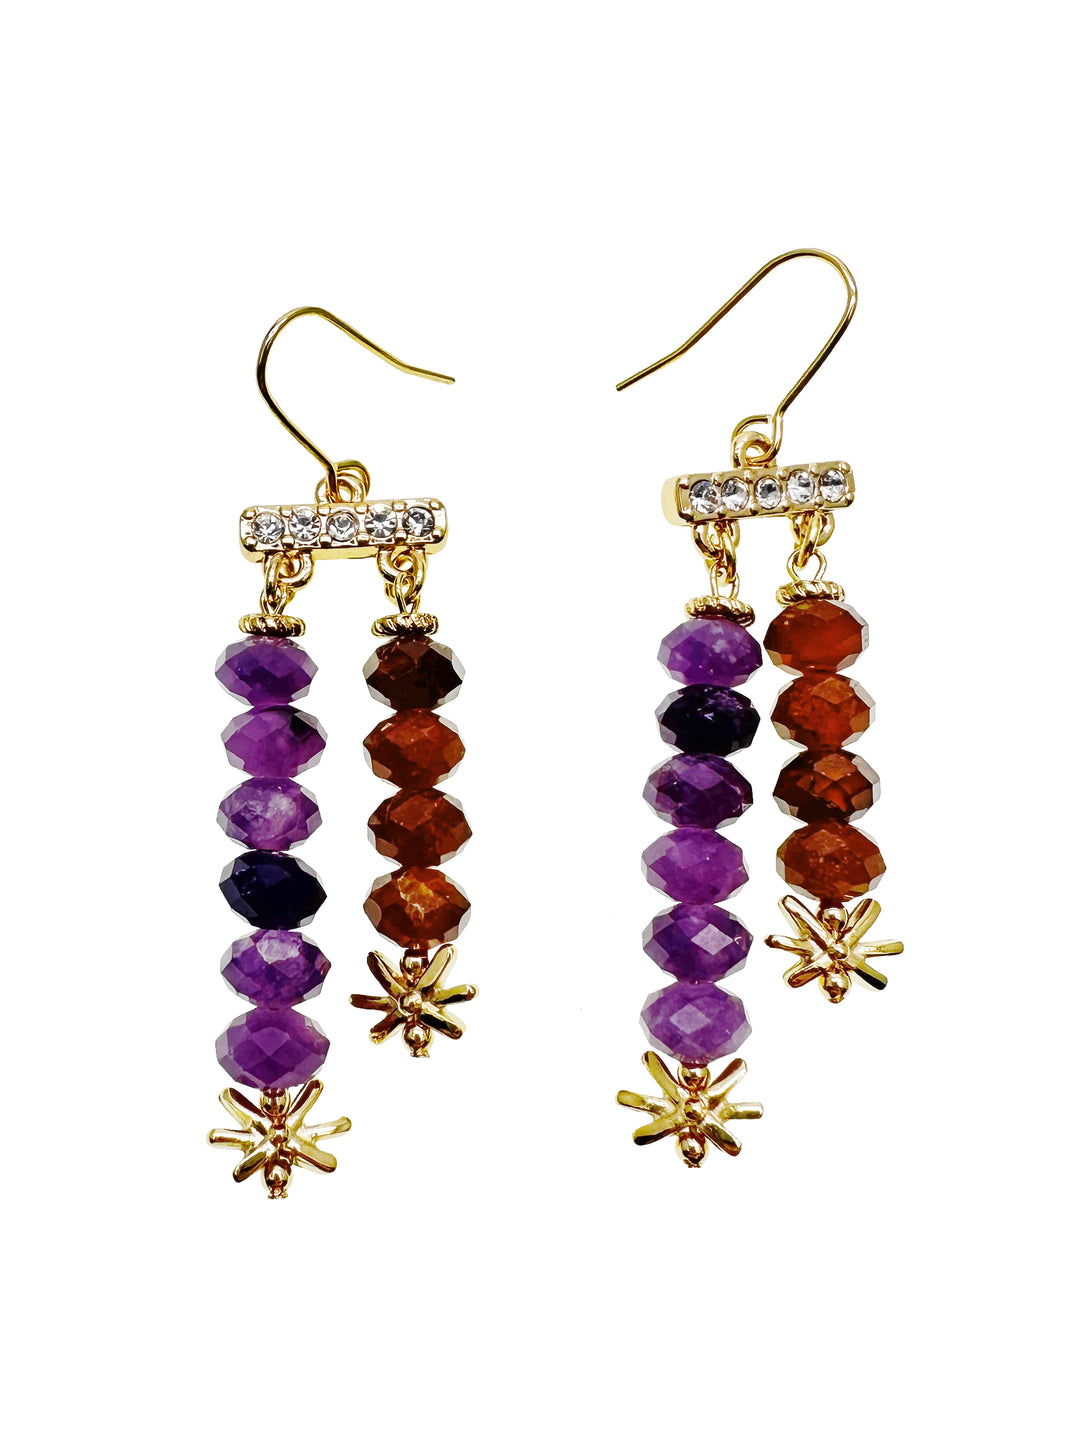  Crafted with precision and attention to detail, these earrings showcase the stunning combination of rich amethyst and vibrant orange garnet gemstones. 